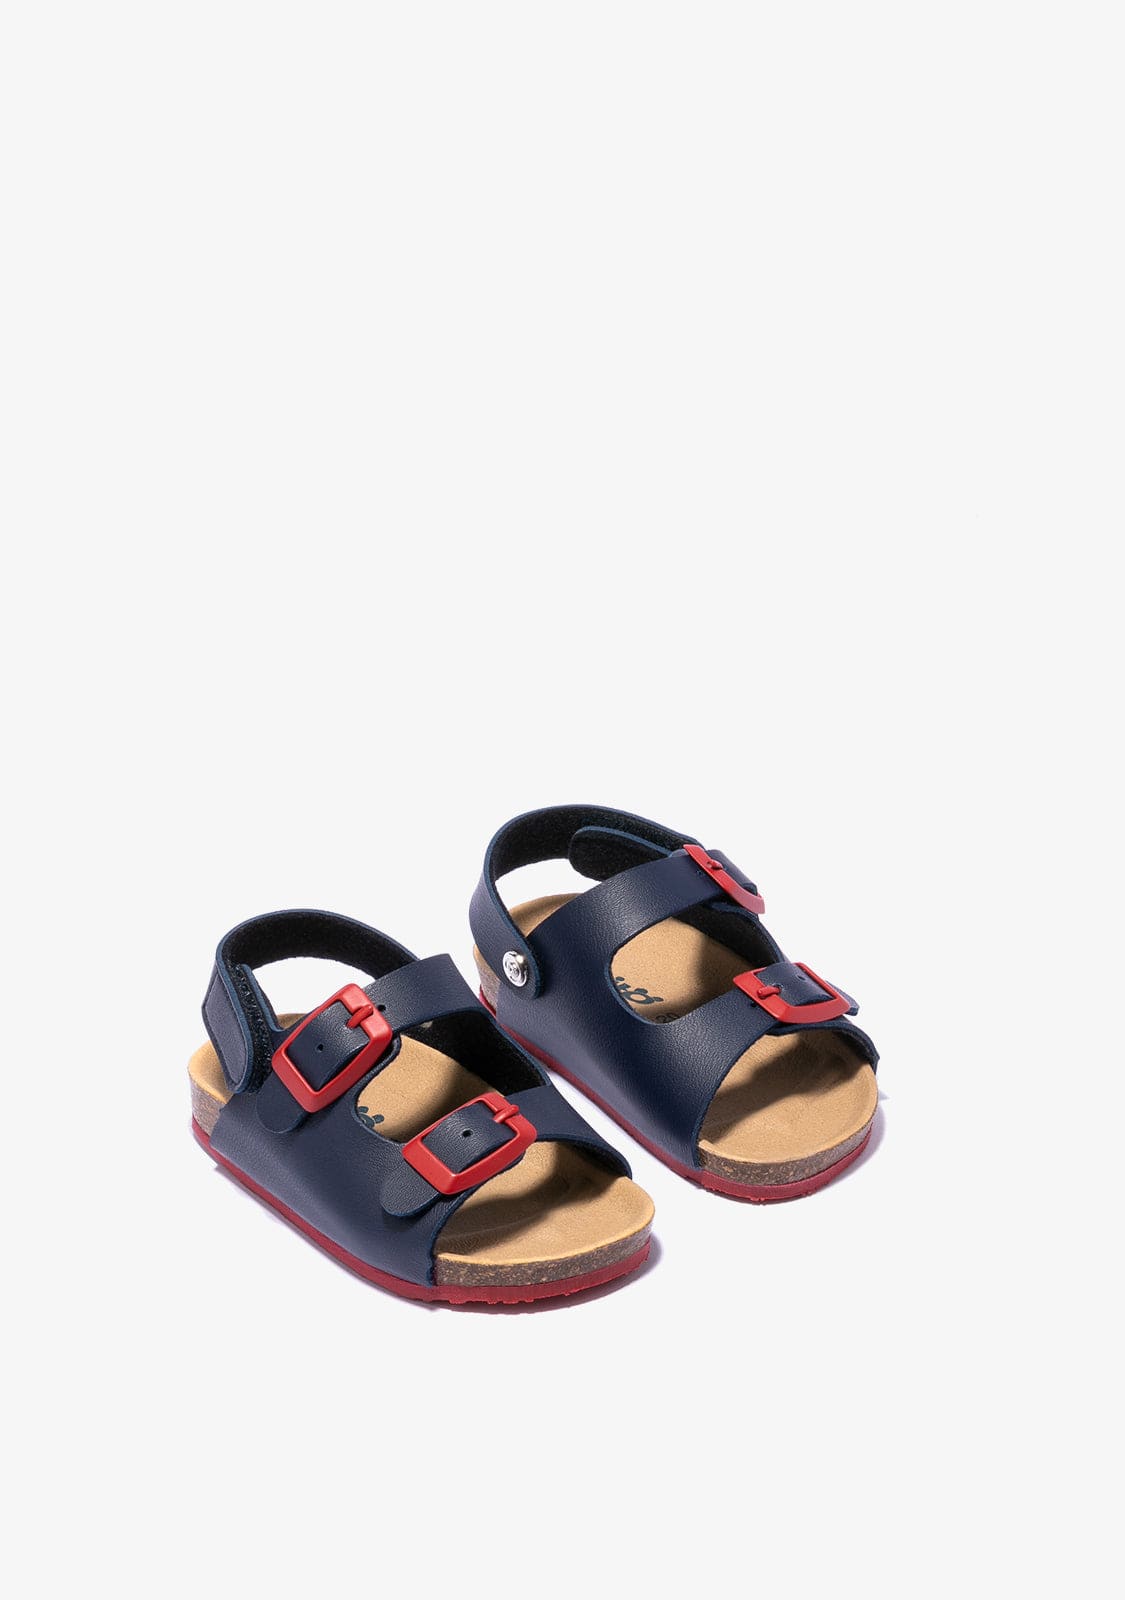 OSITO Shoes Baby's Navy Bio Sandals